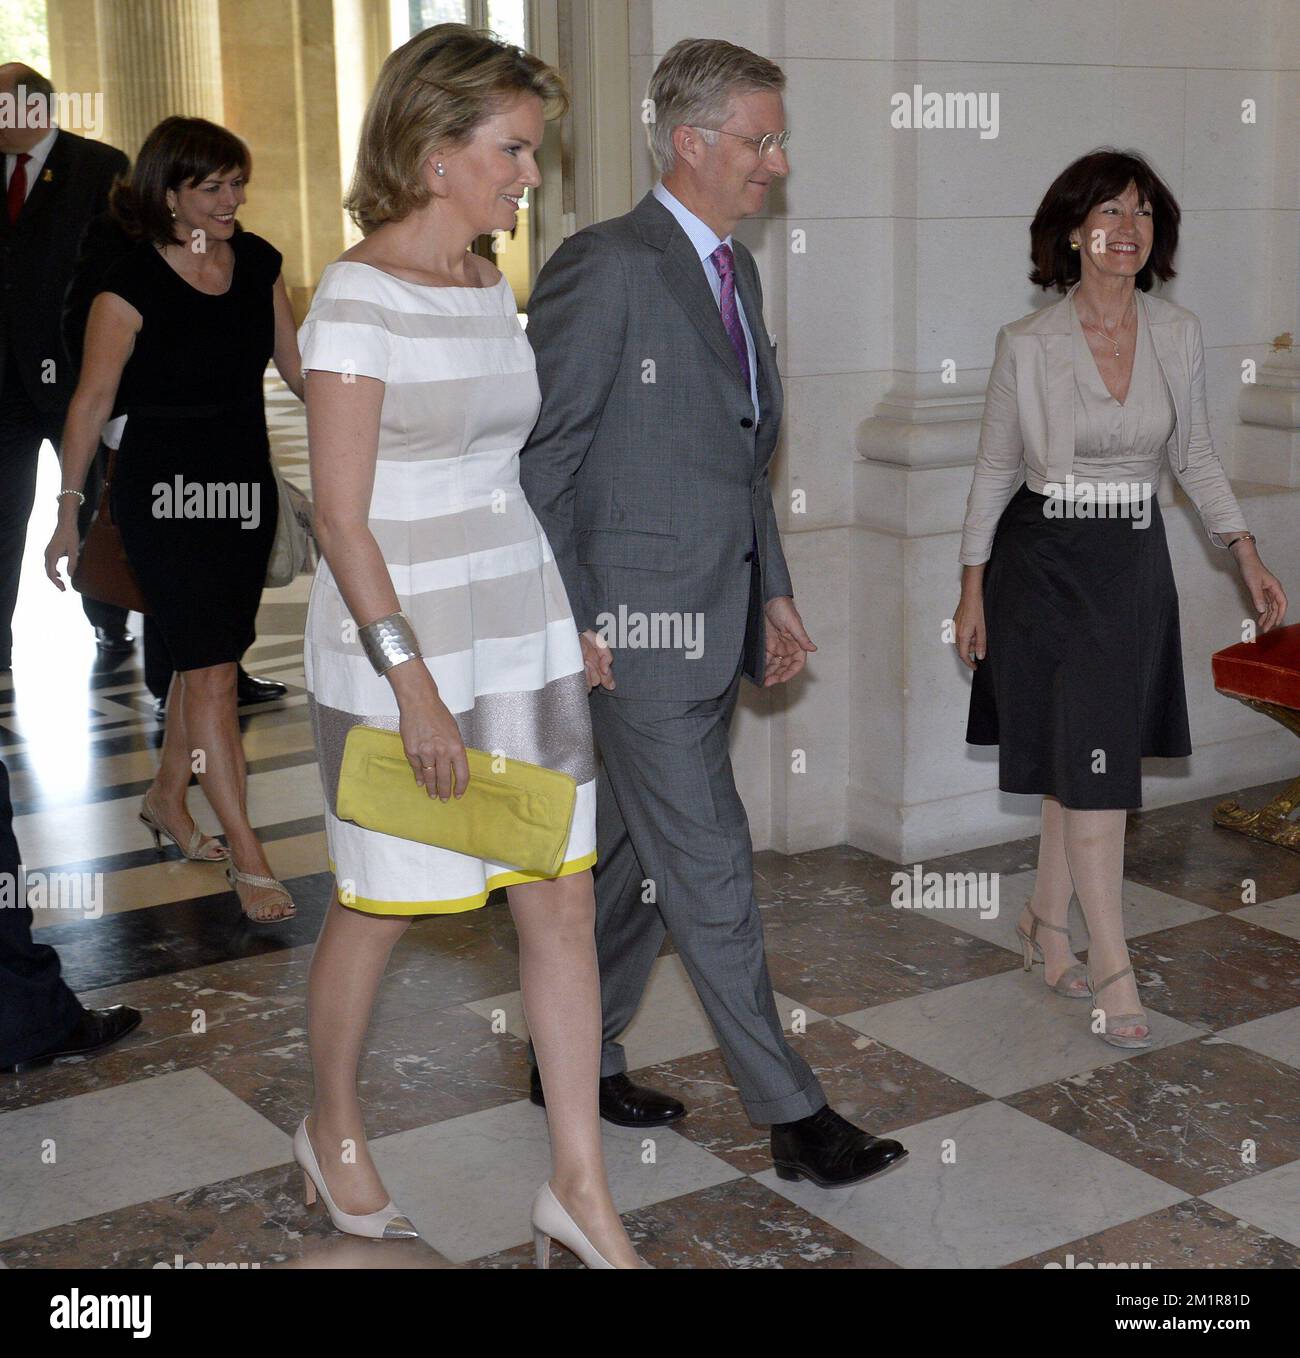 Vice-Prime Minister and Interior Minister Joelle Milquet, Princess Mathilde of Belgium, Crown Prince Philippe of Belgium and Vice-Prime Minister and Minister of Social Affairs and Public Health Laurette Onkelinx arrive for a reception at the royal castle in Laeken - Laken, Brussels for the members of the Government, Monday 15 July 2013.  Stock Photo